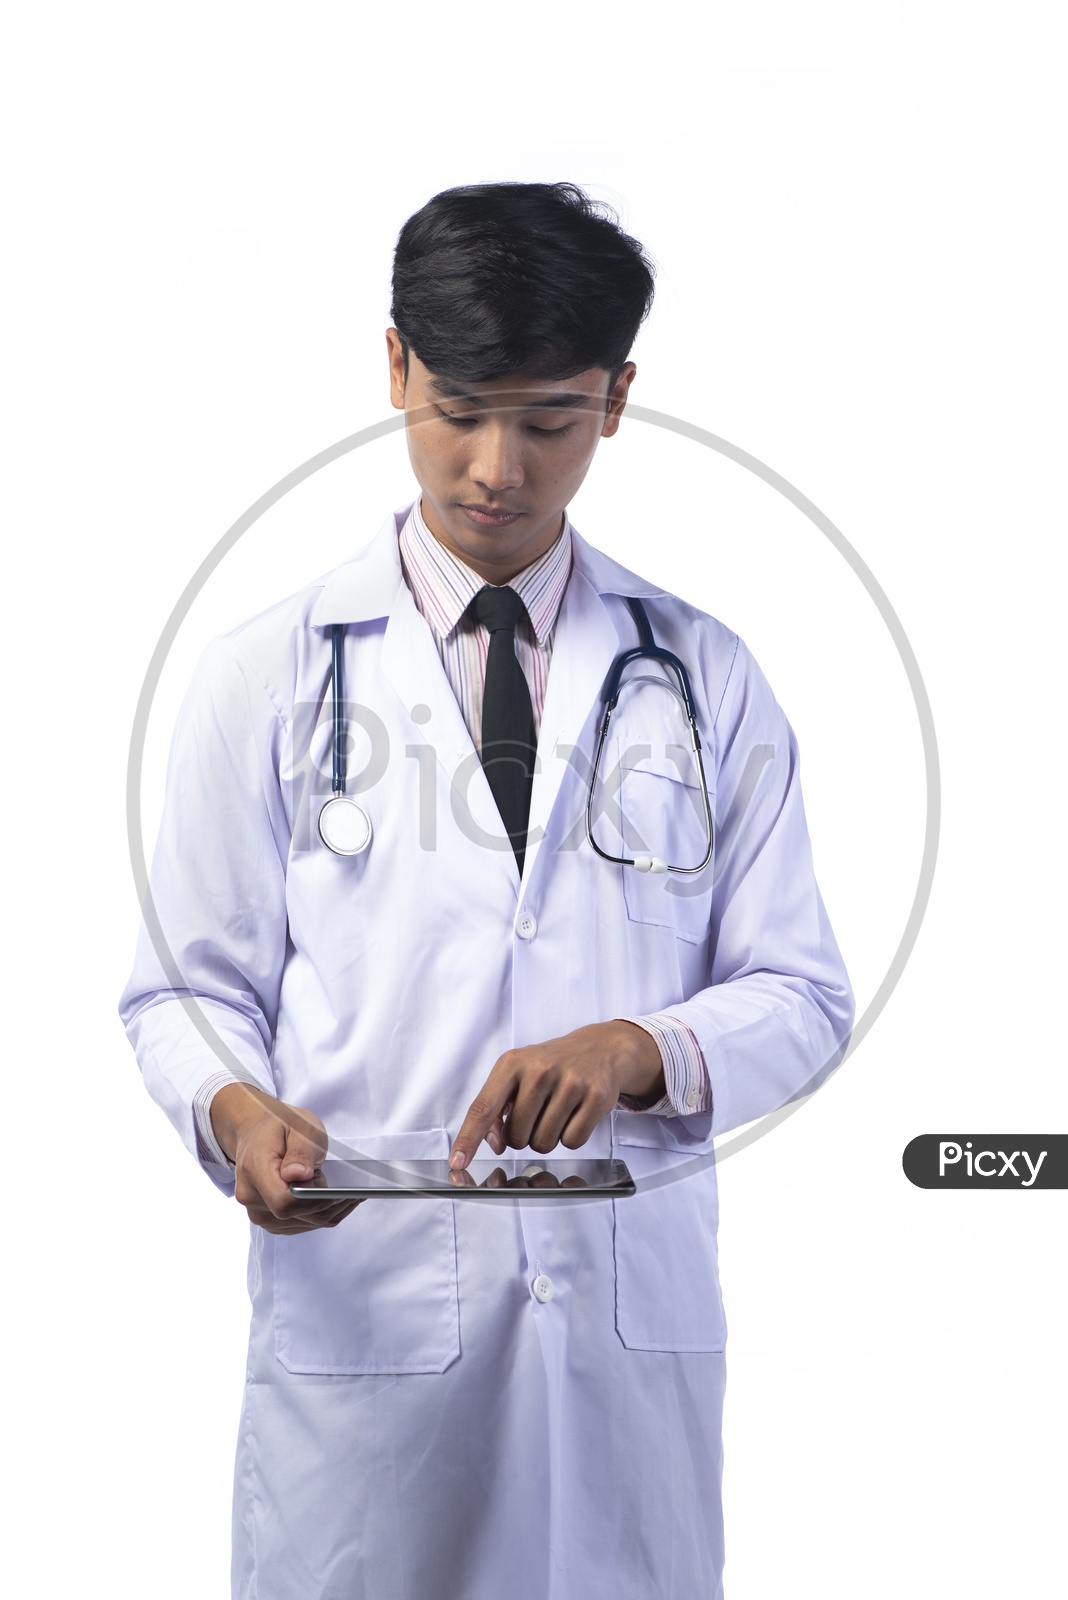 Asian Doctor with Stethoscope using Tablet or iPad isolated on White Background